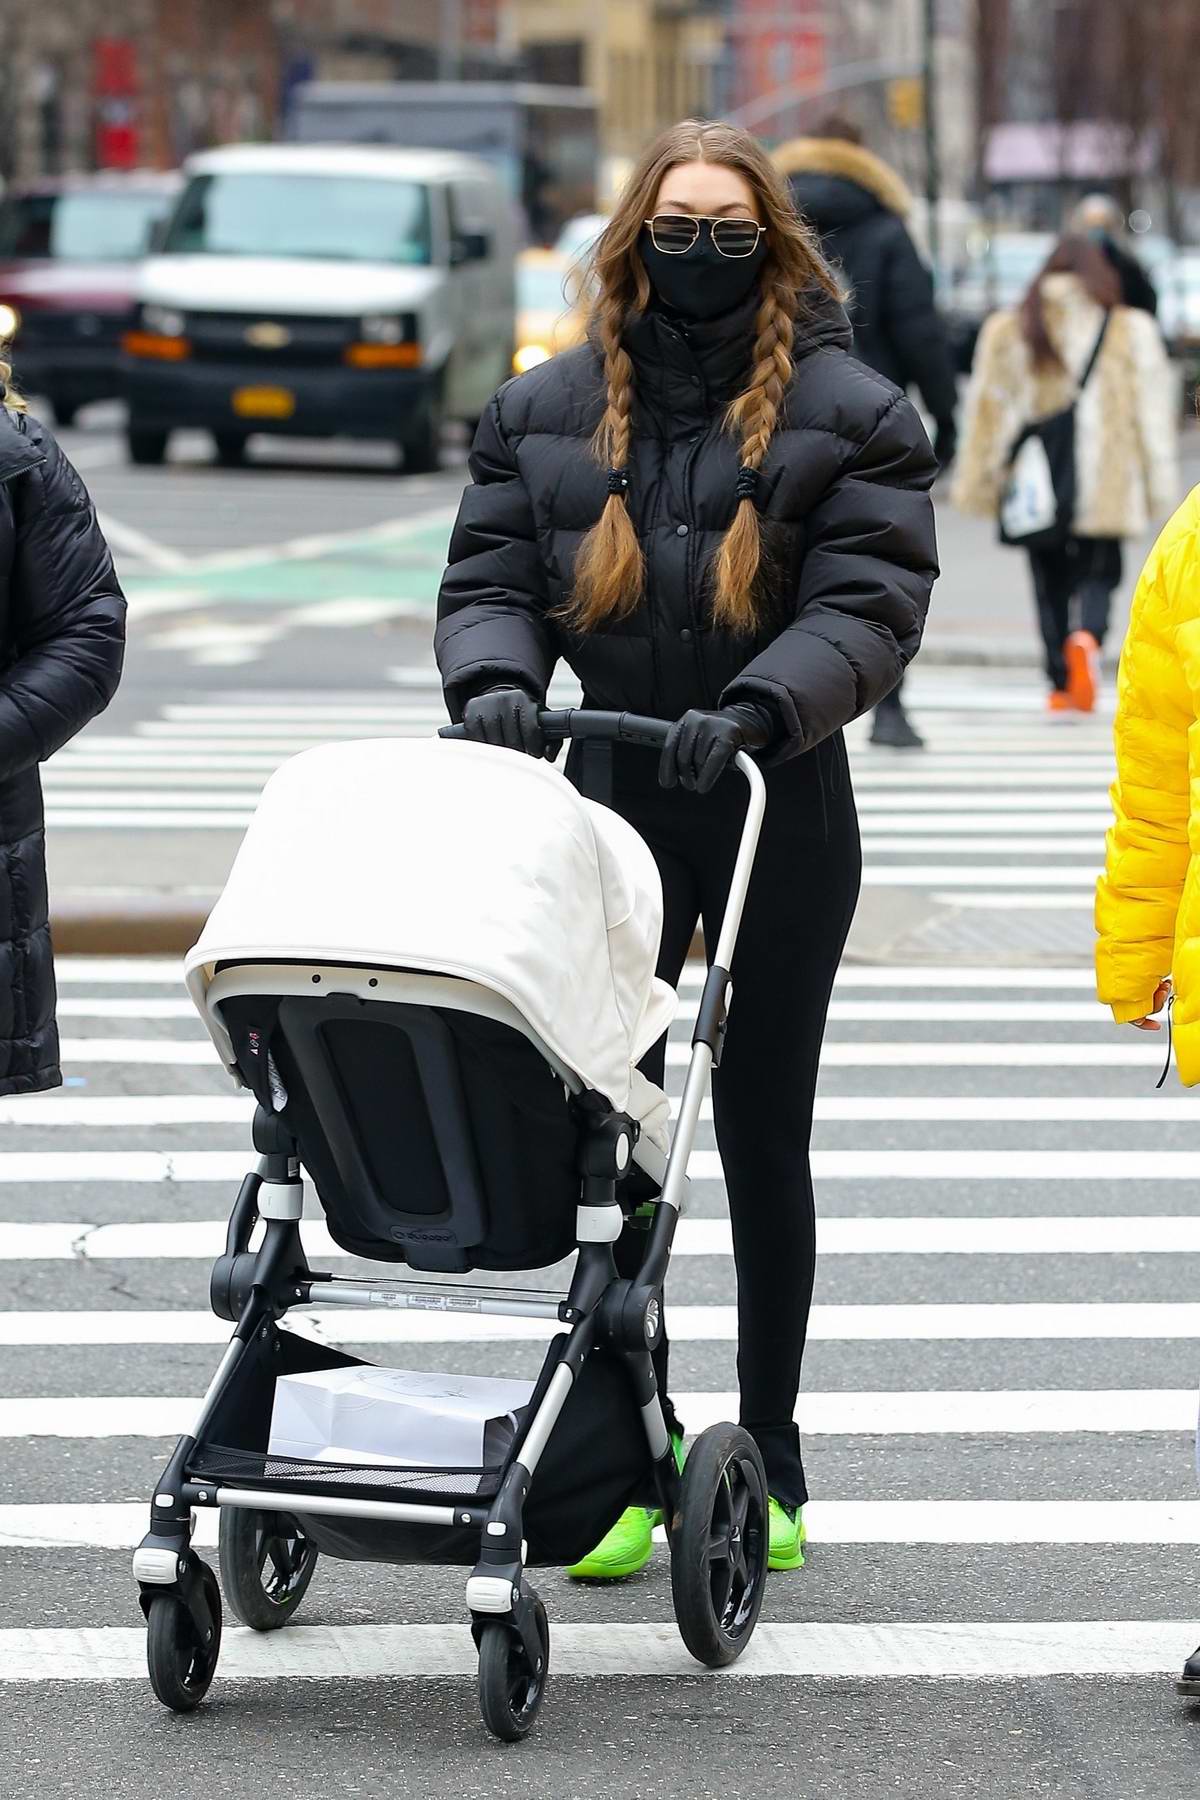 Gigi Hadid sports a black puffer jacket and leggings while out with her  baby daughter in